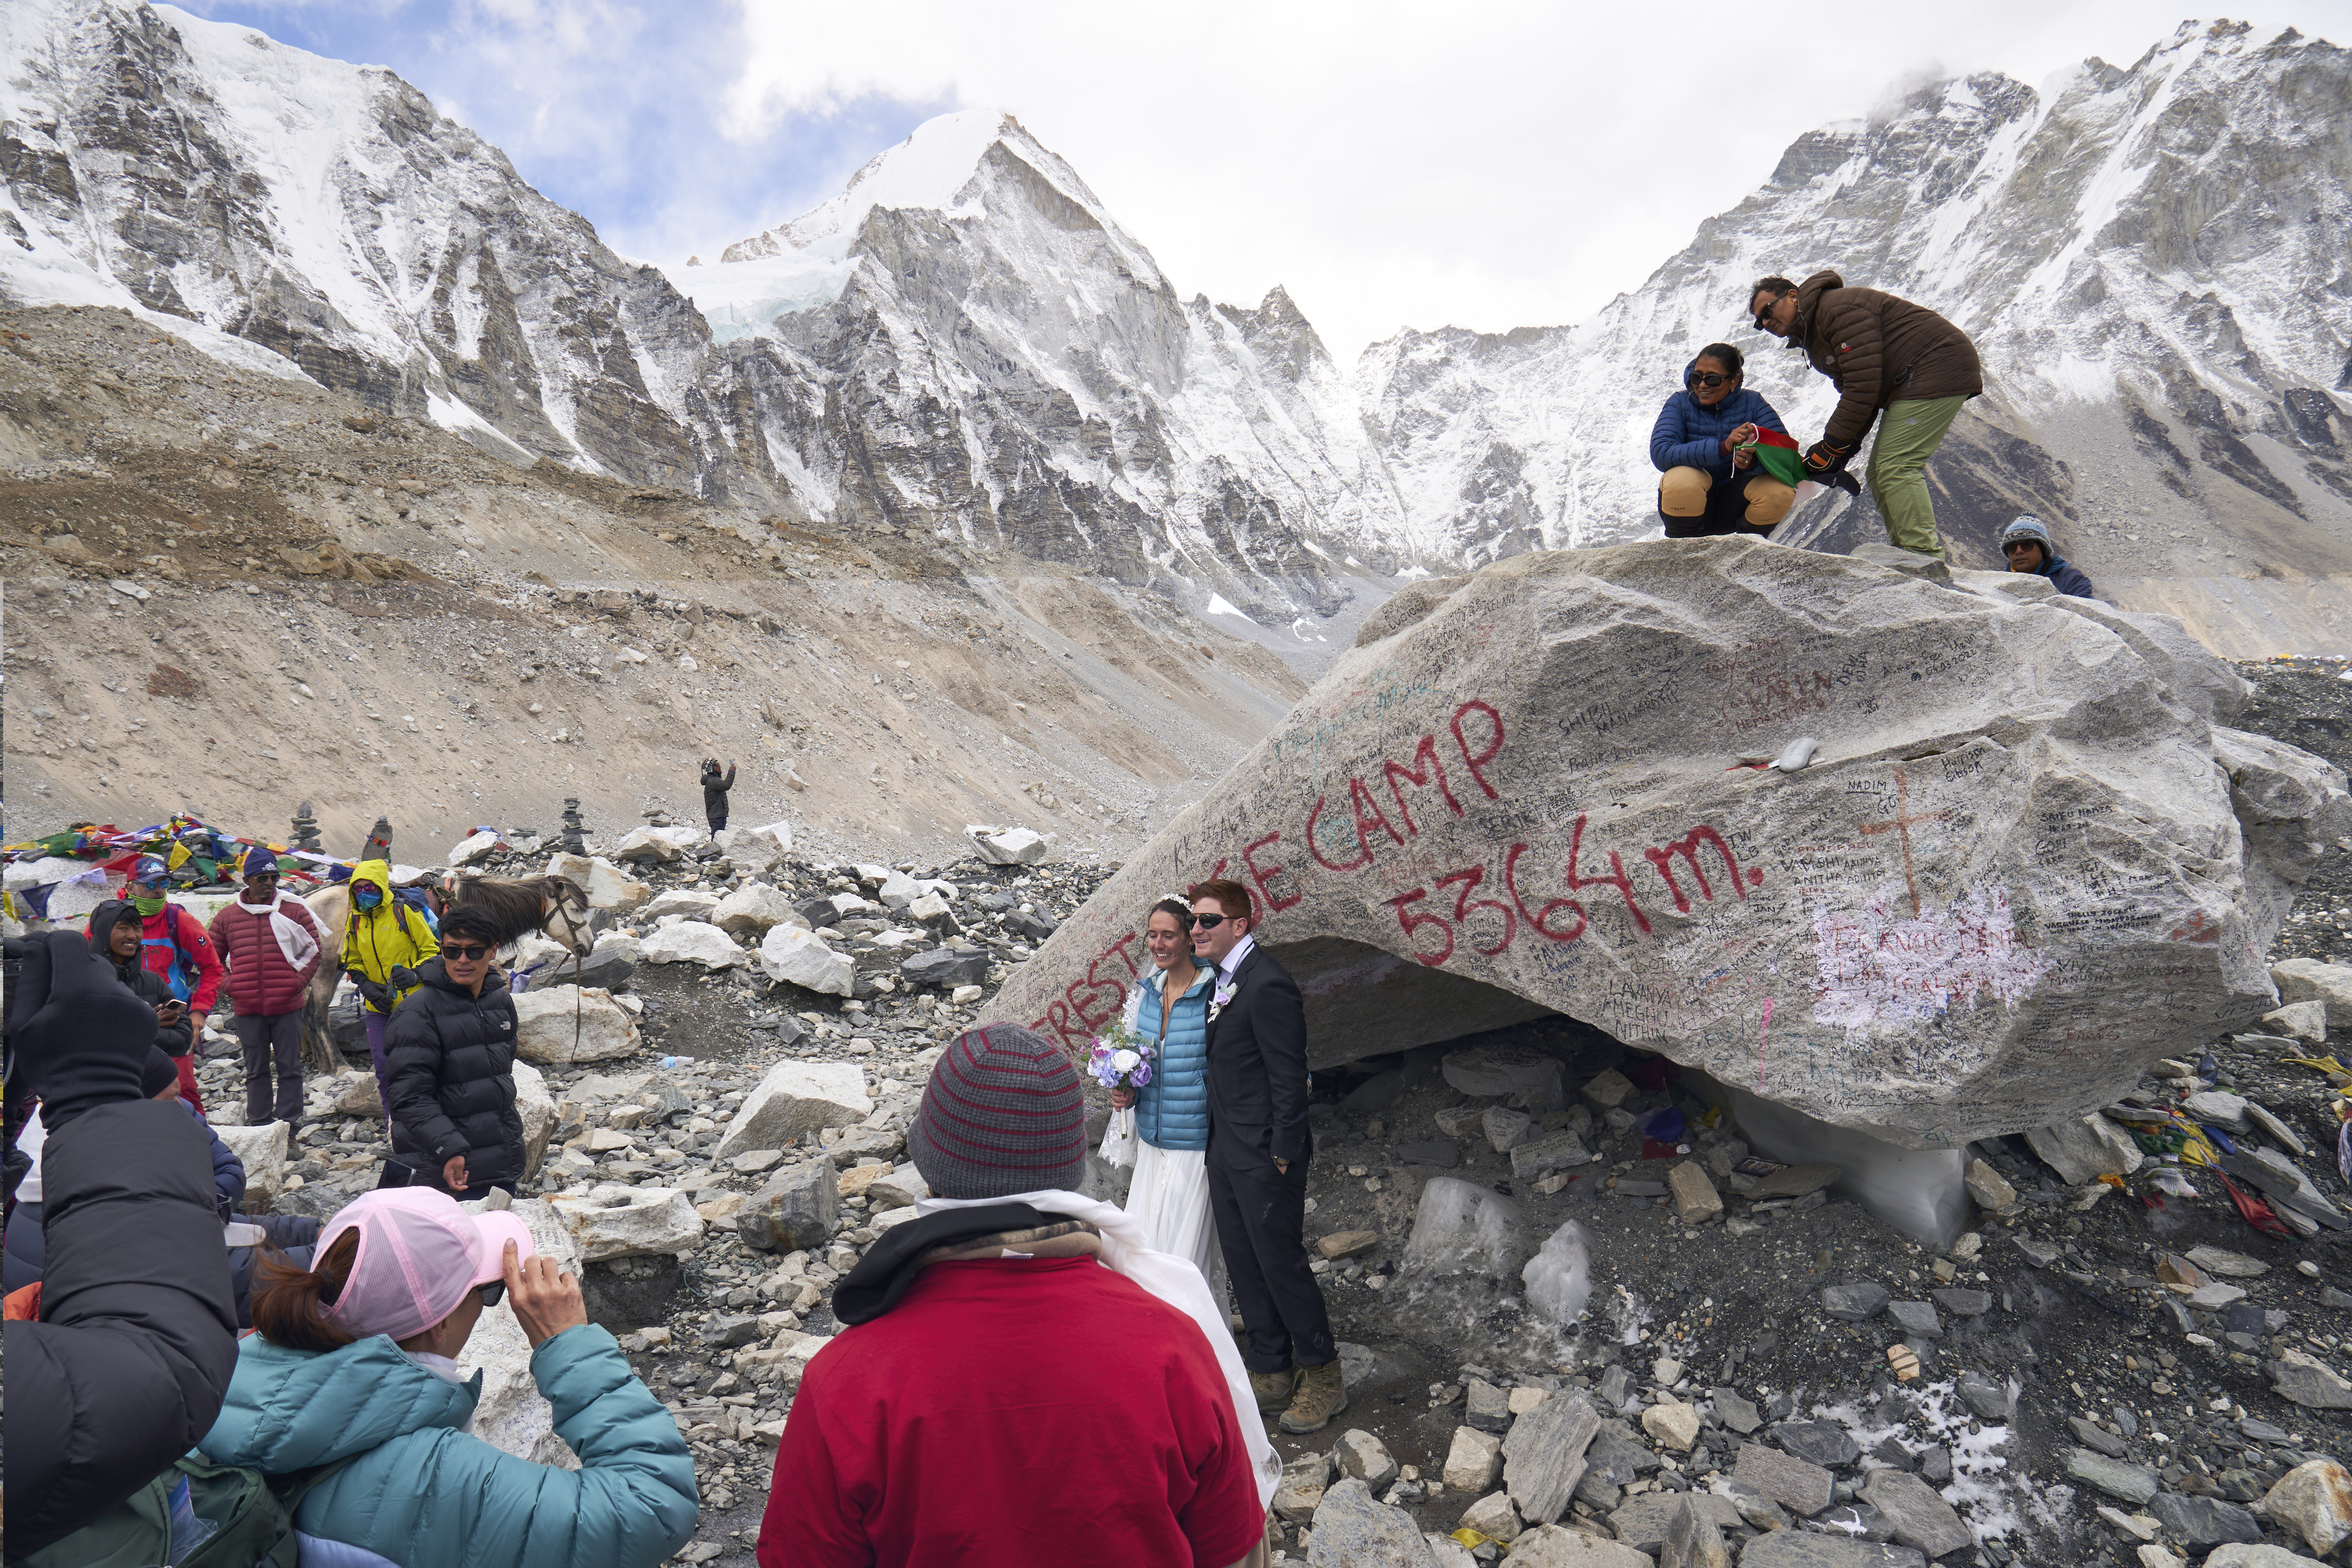 Wedding picture at Everest Base Camp